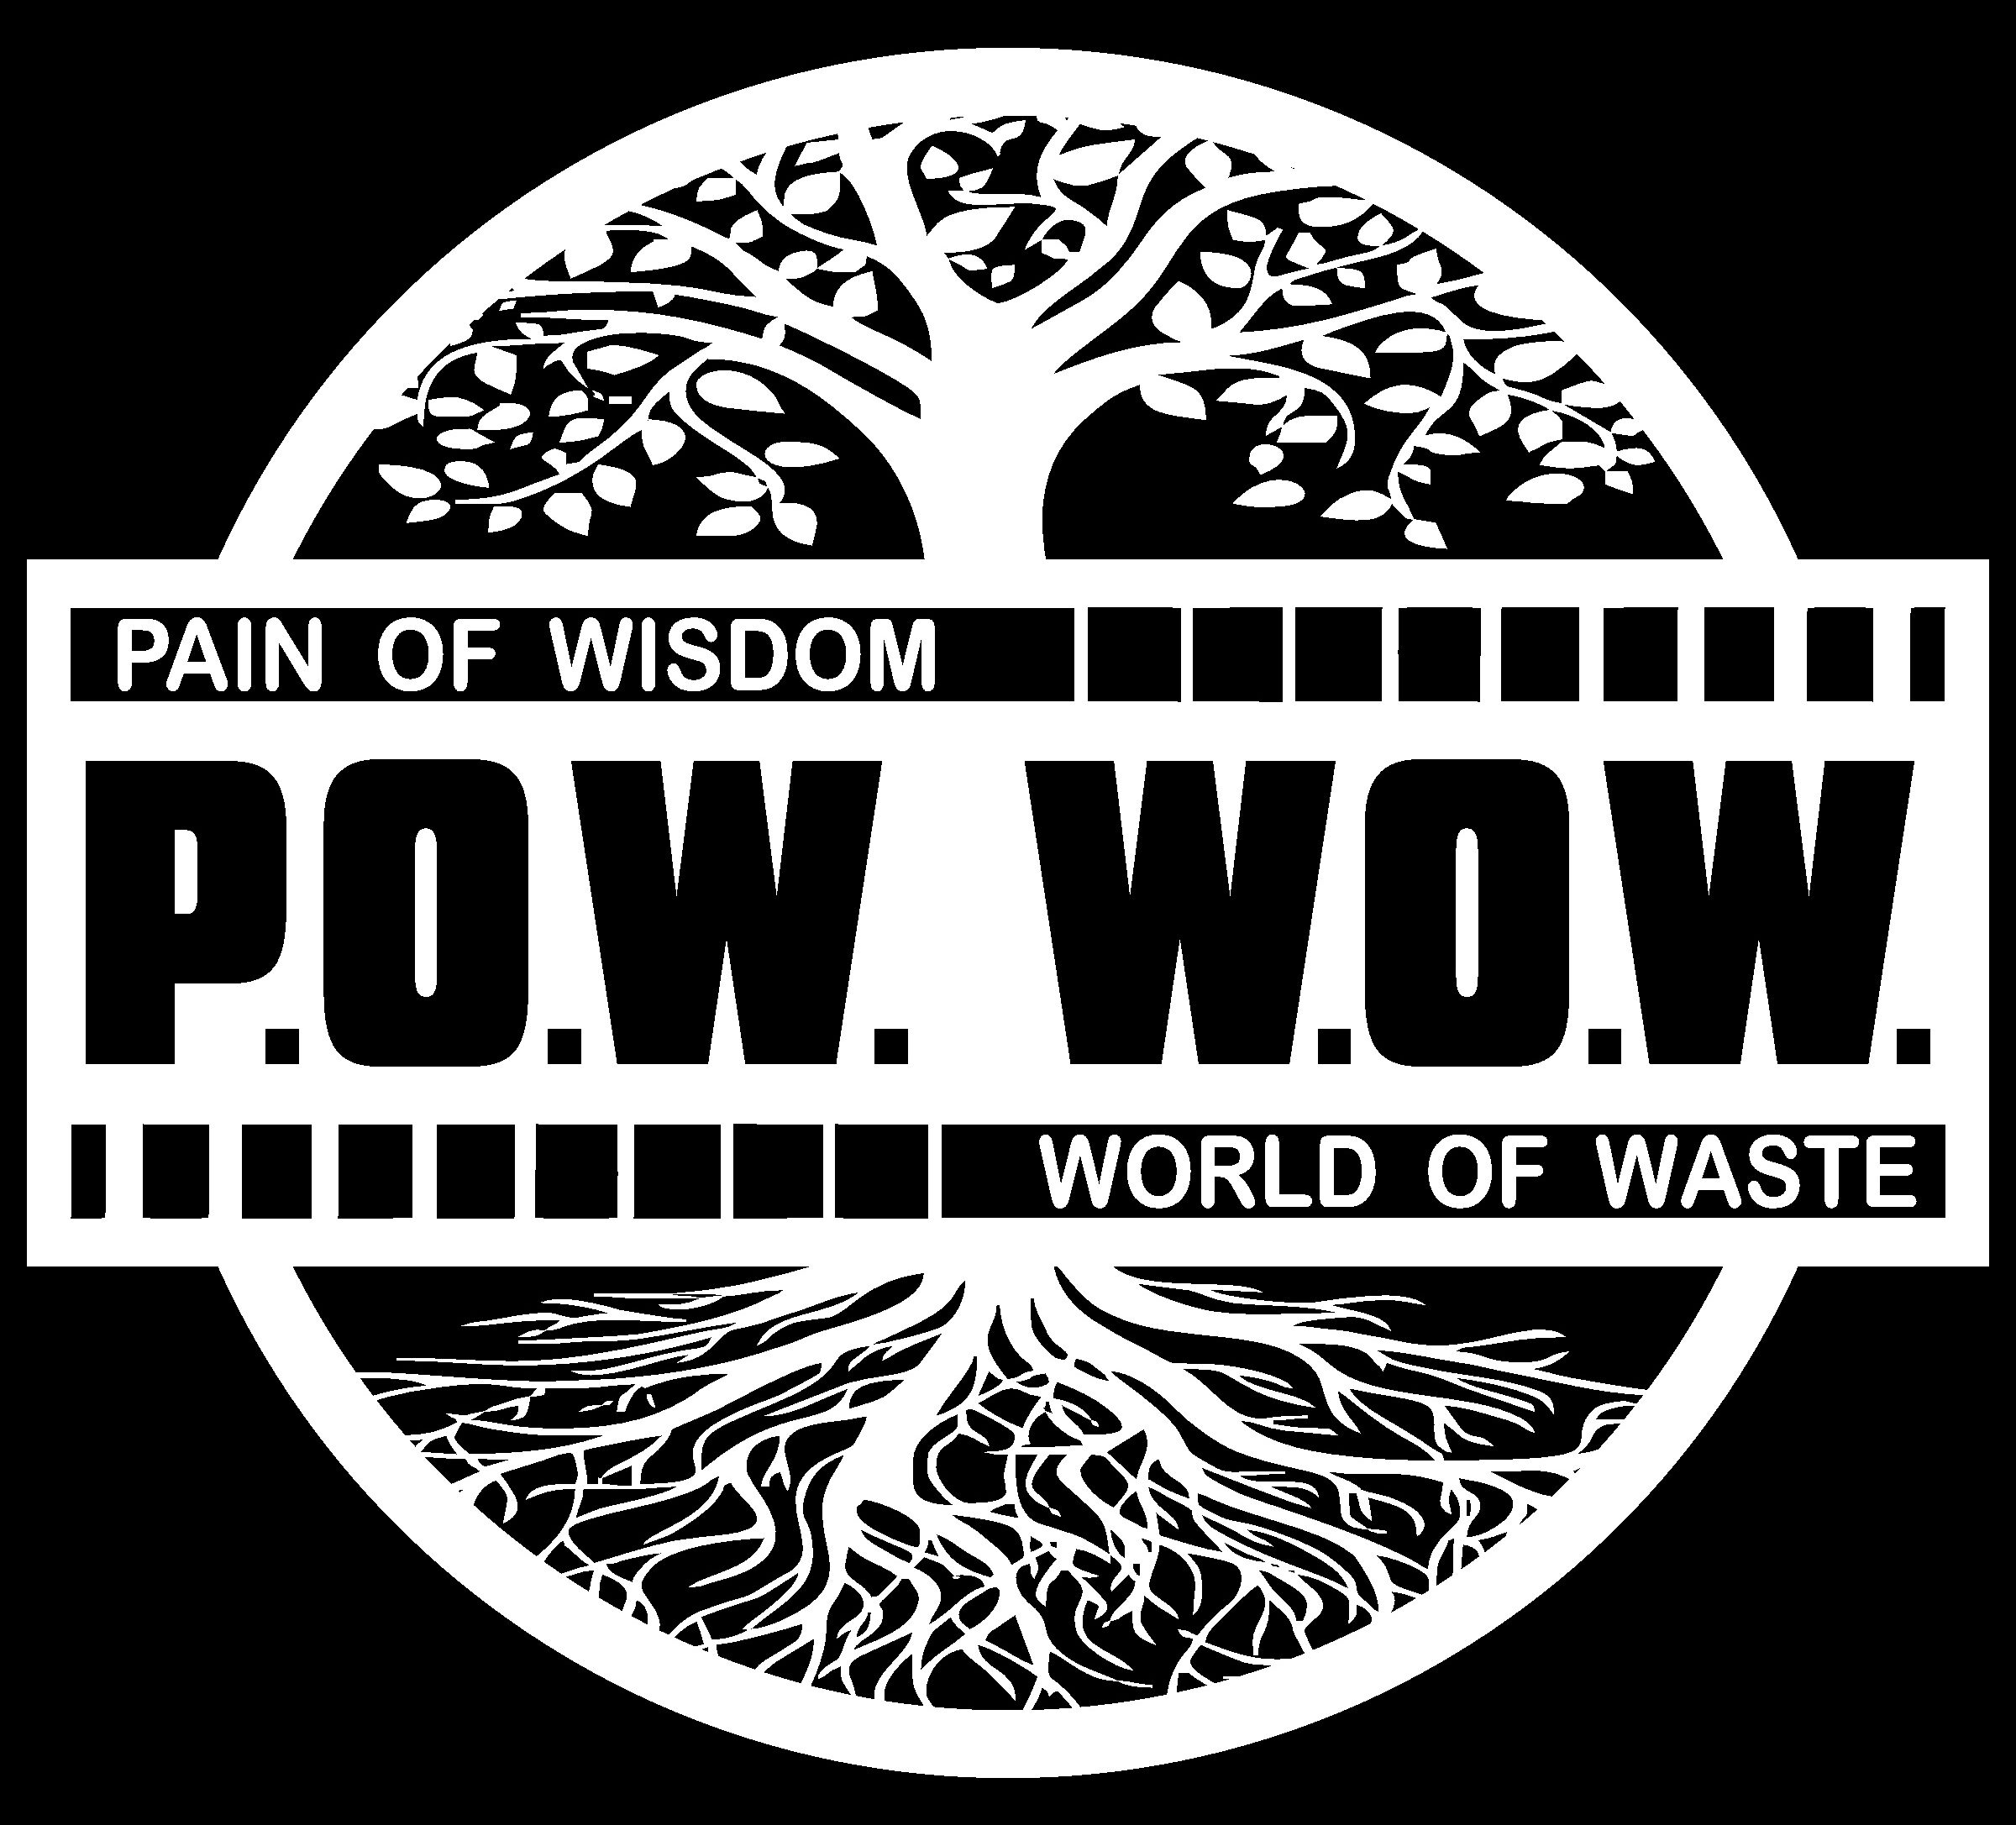 Pain of Wisdom in a World of Waste